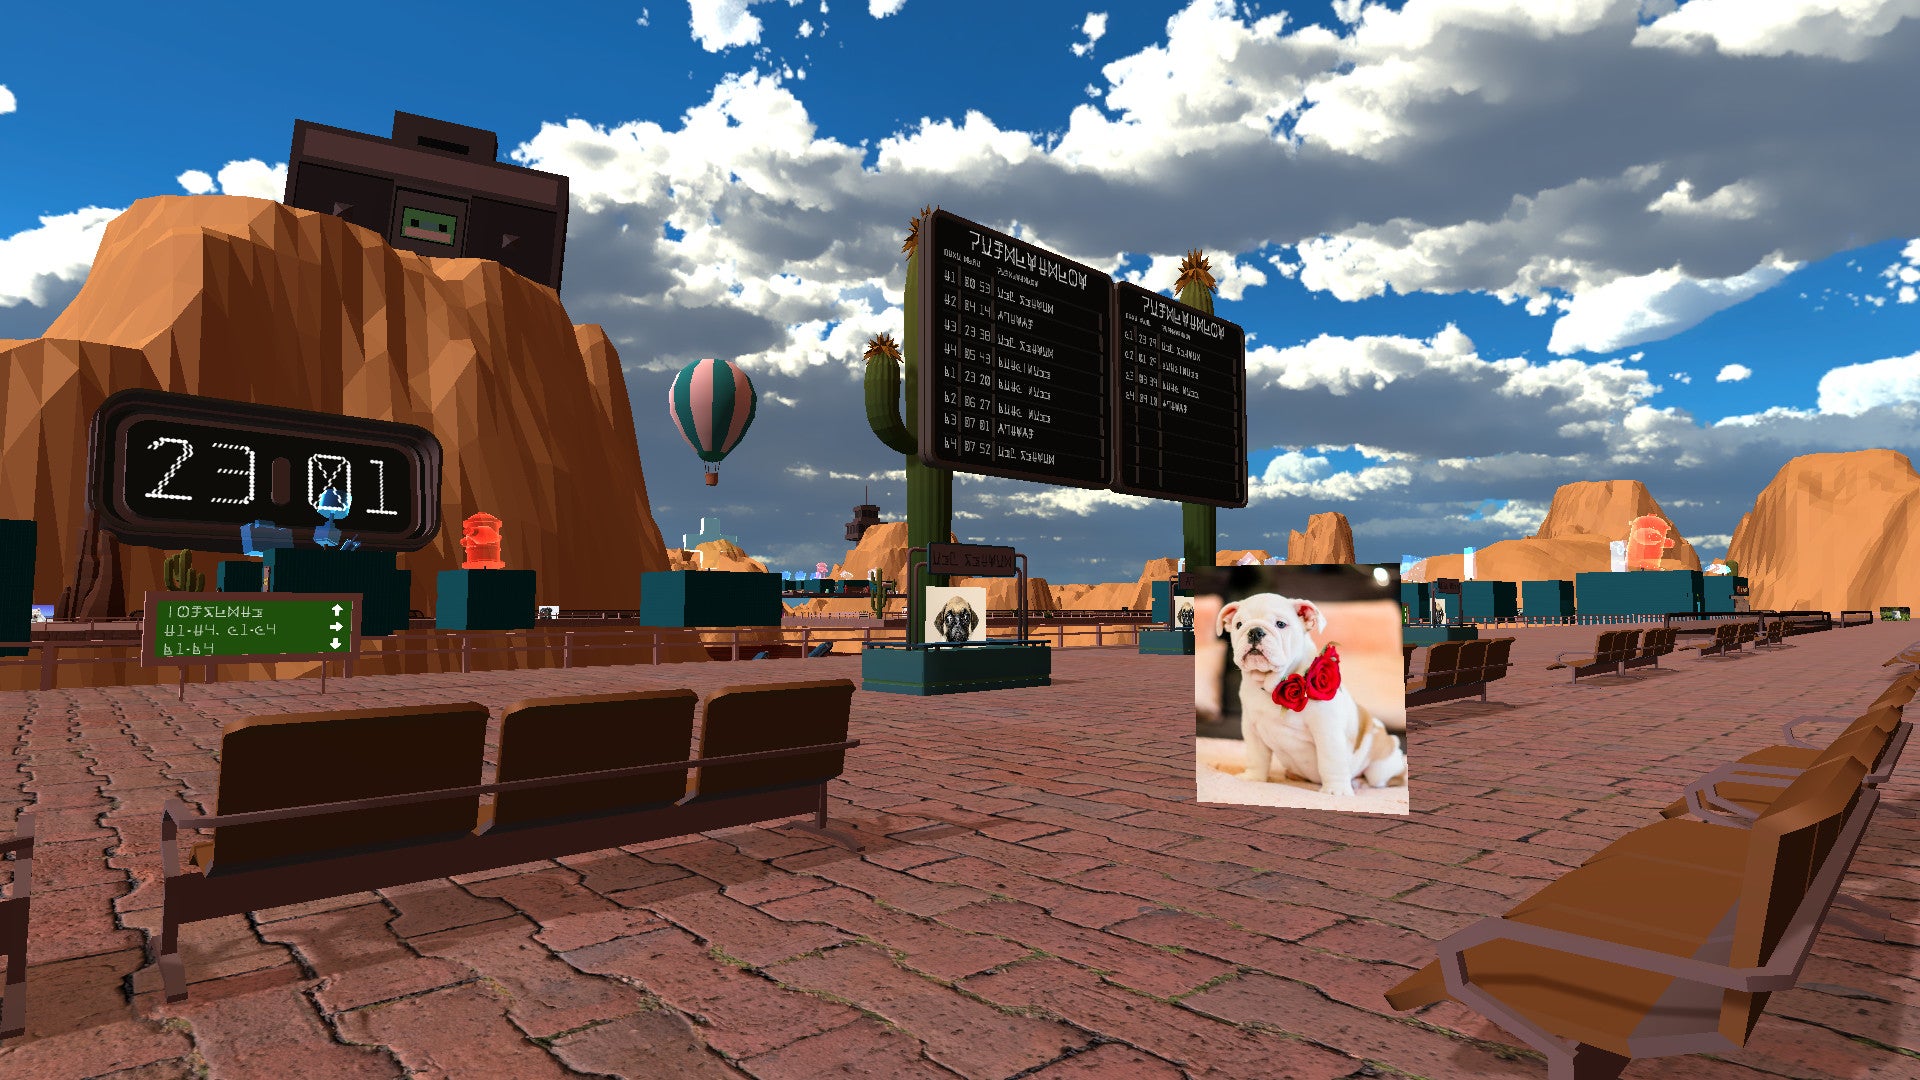 An image from An Airport For Aliens Run By Dogs which shows an airport waiting area on a mountainous planet. There's a hot air balloon rising in the distance and a white bulldog wearing a necklace of roses in front of you.